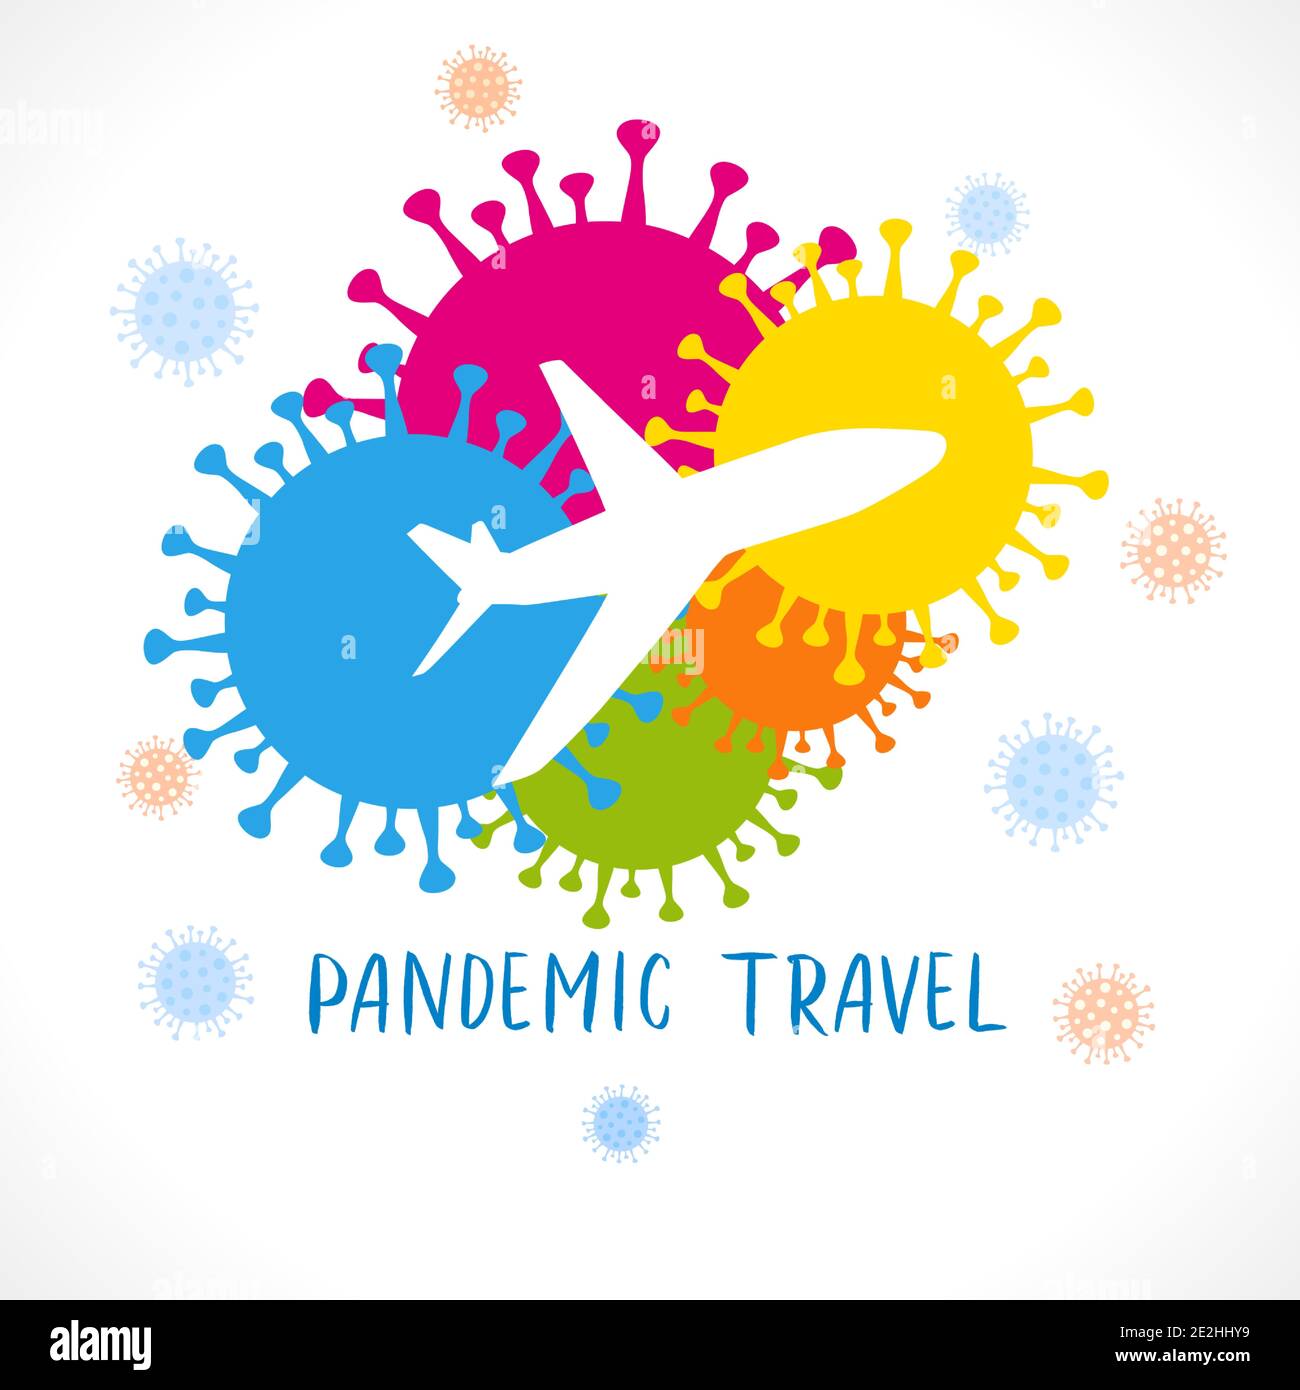 Pandemic travel, concept prevention covid-19 banner. Coronavirus quarantine colored flat web icon of such as hygiene, disinfection, symptoms Stock Vector